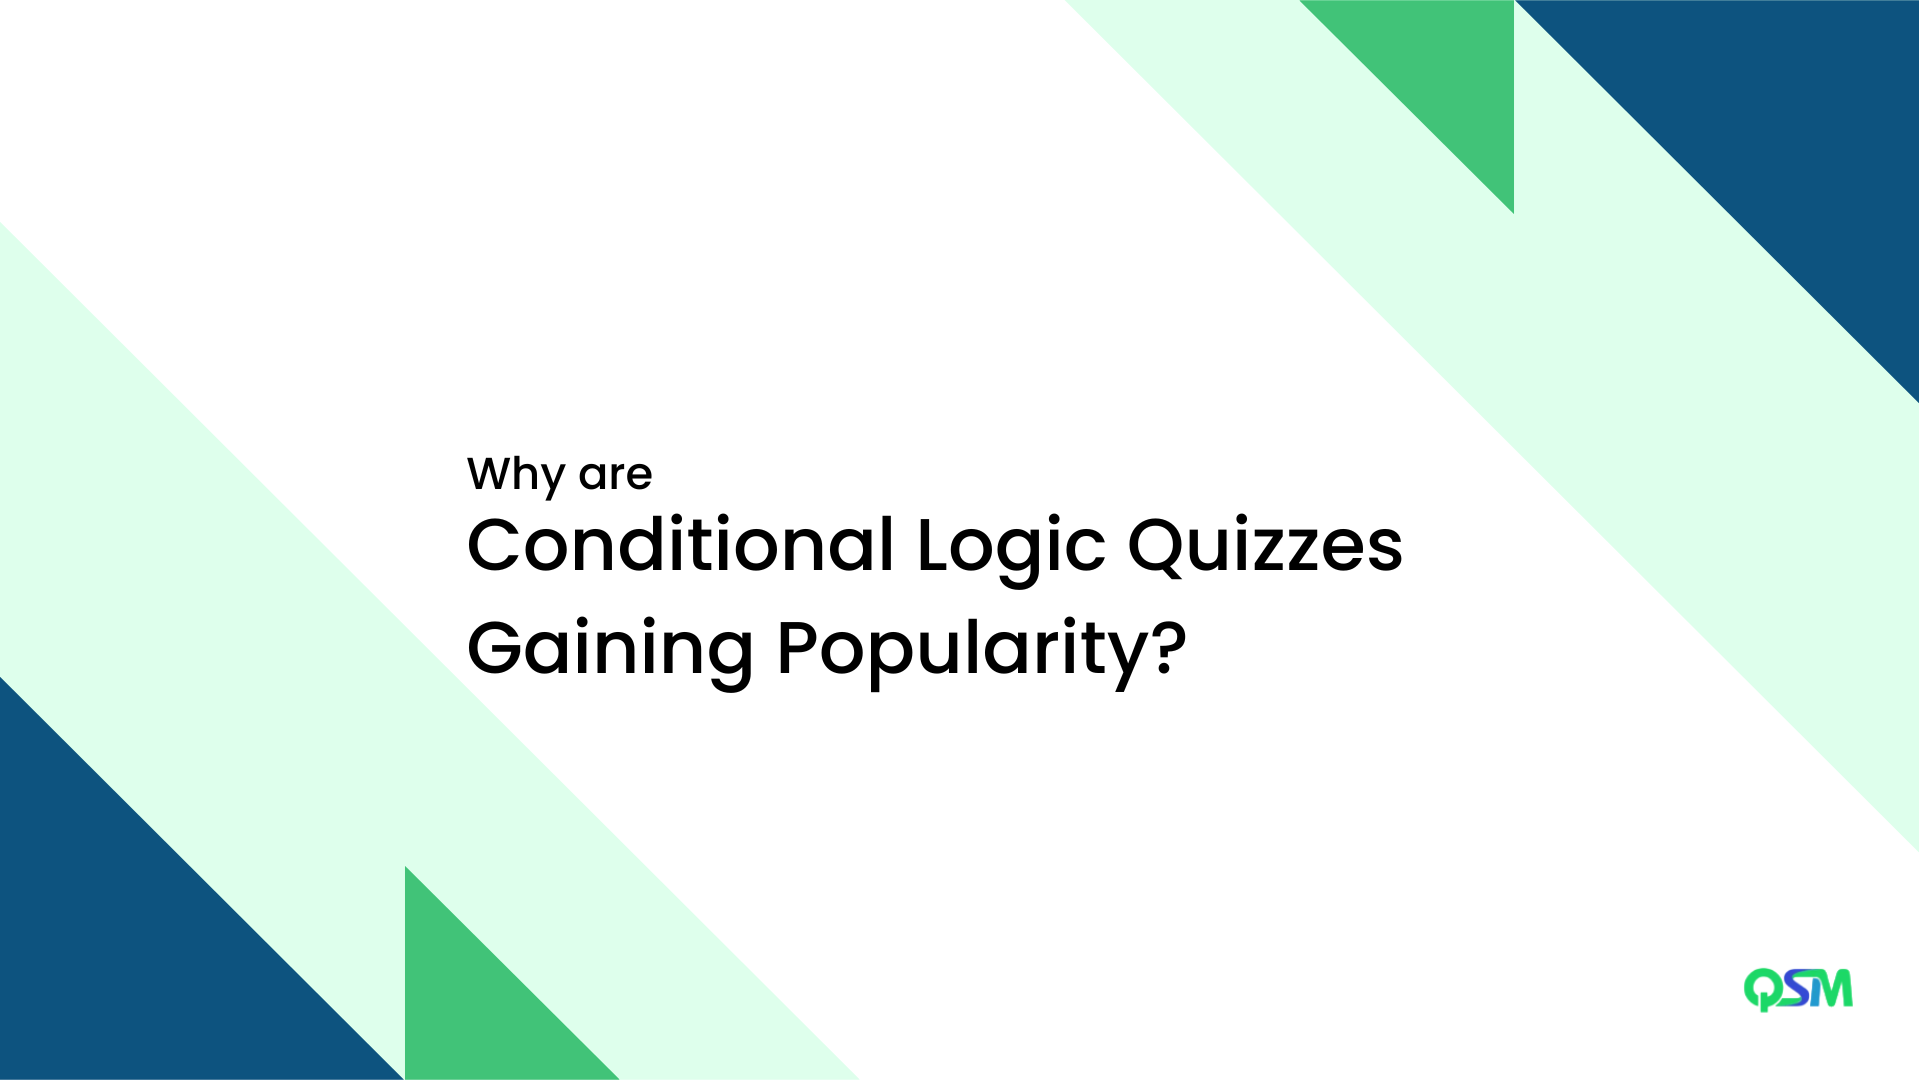 Why are Conditional Logic Quizzes gaining popularity?